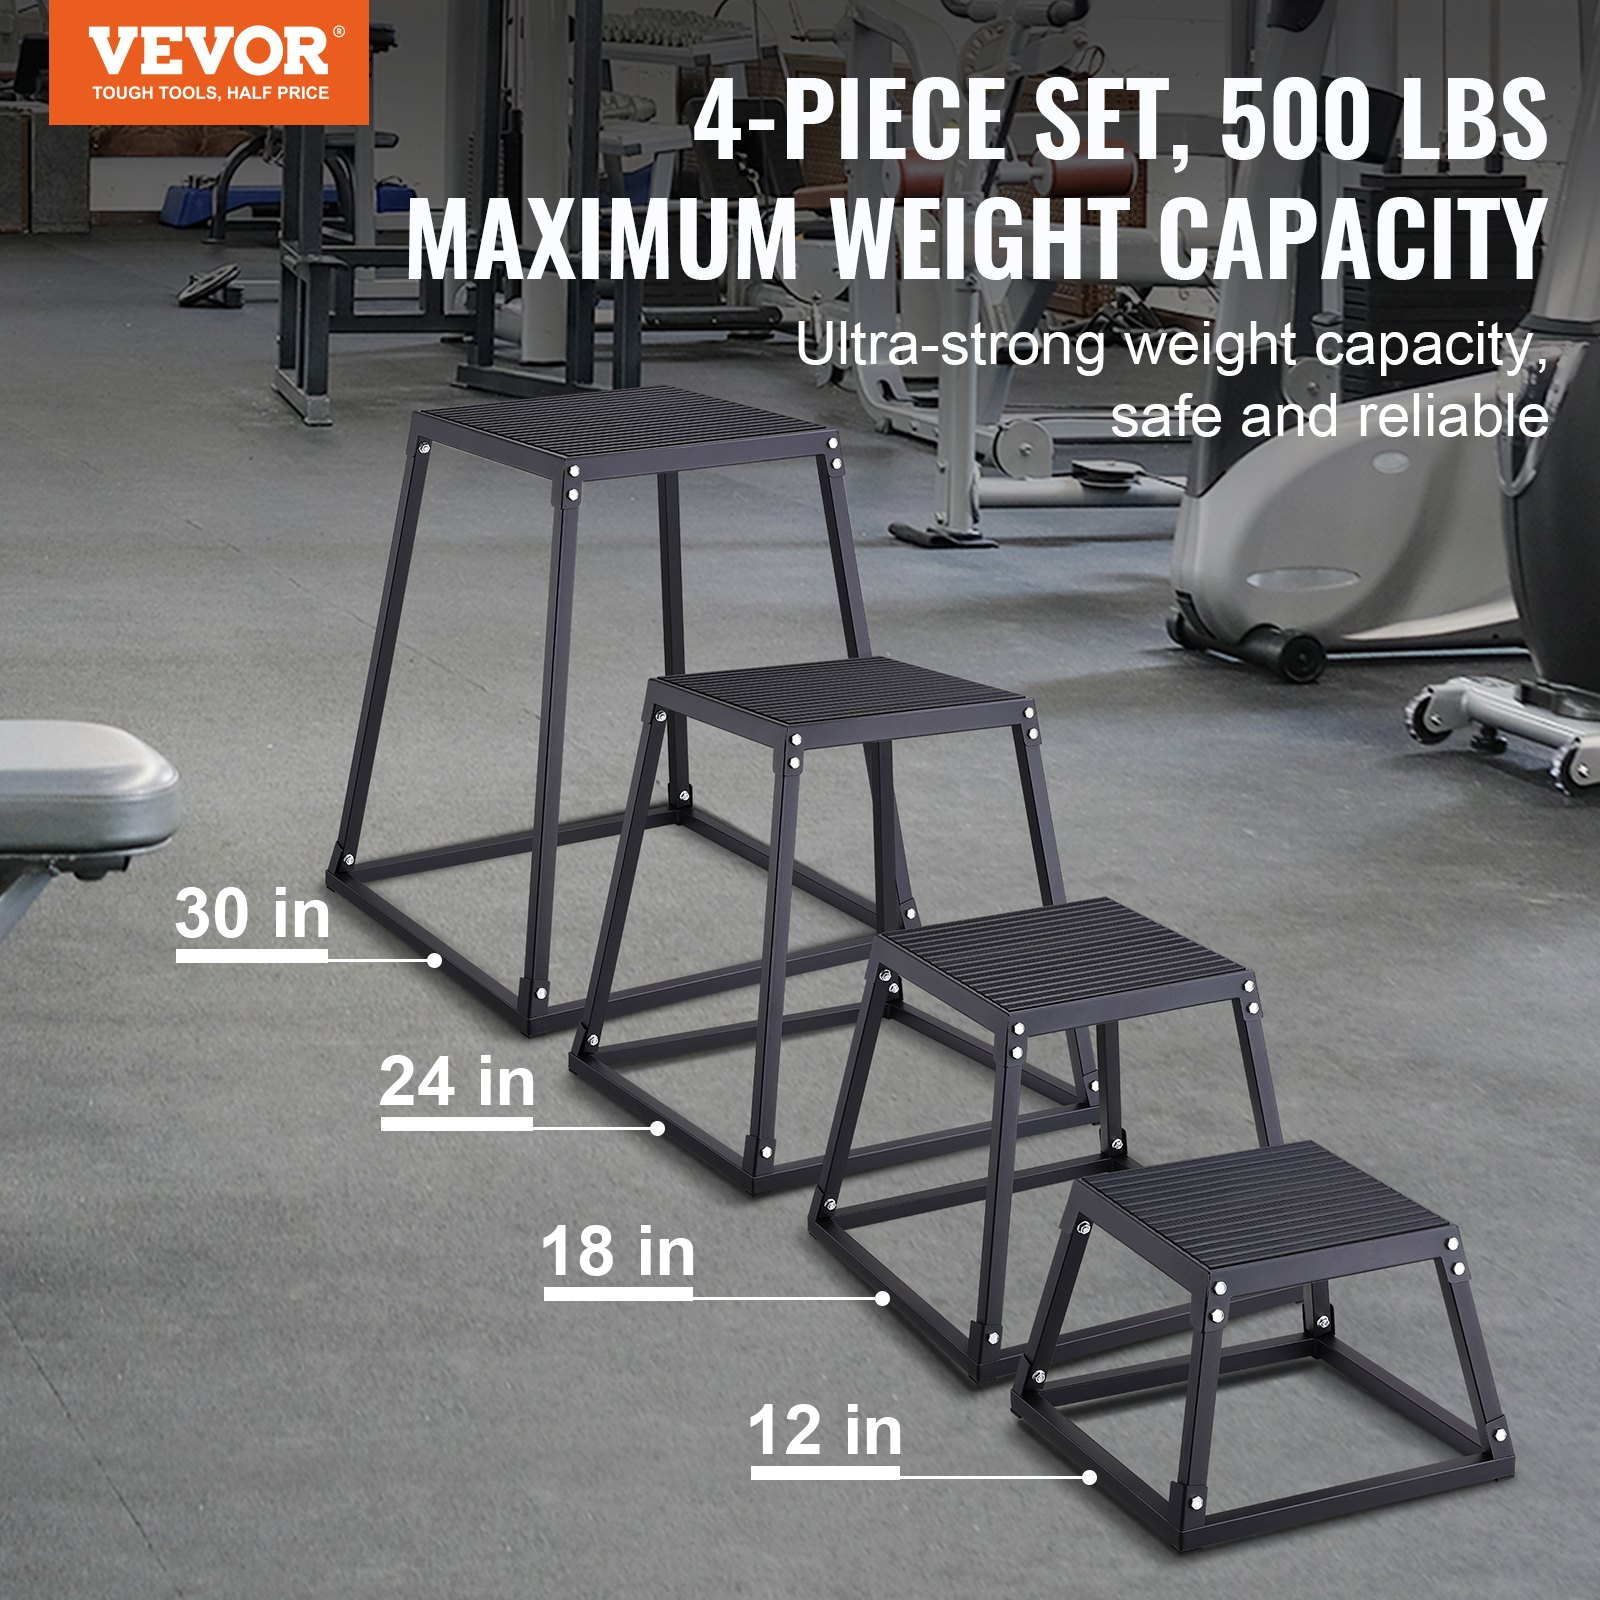 VEVOR Plyometric Jump Boxes - Improve Your Fitness and Strength Training, Goodies N Stuff